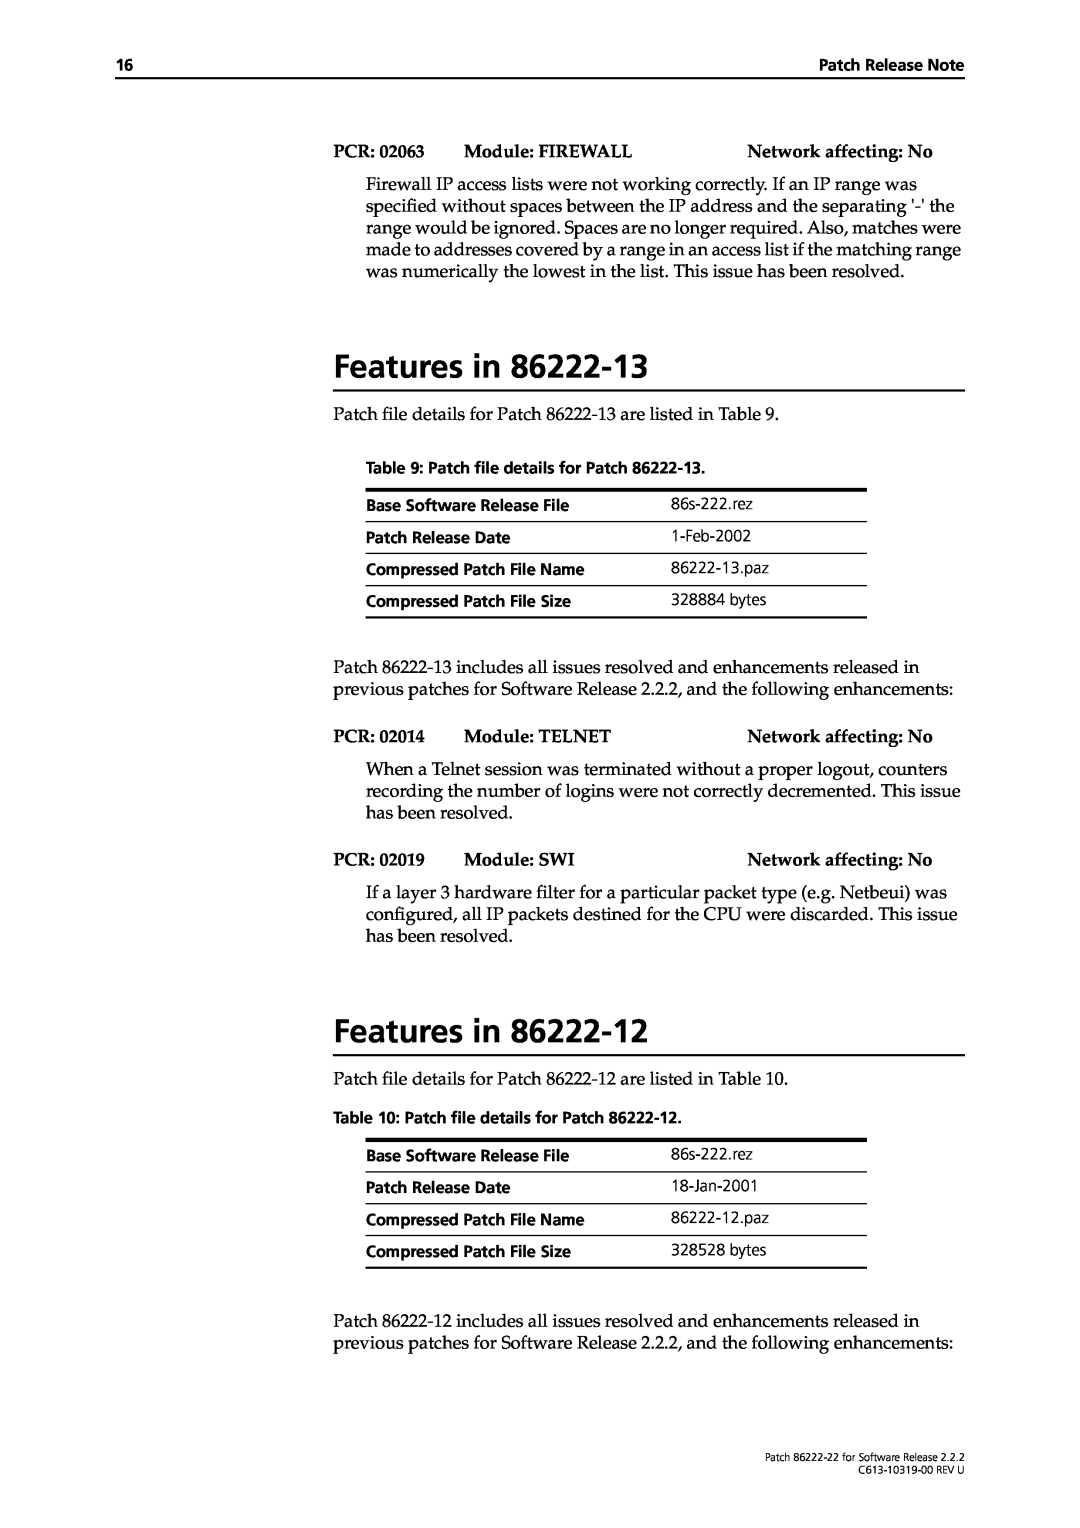 Allied Telesis R800 Series manual Features in, Patch file details for Patch 86222-13 are listed in Table 